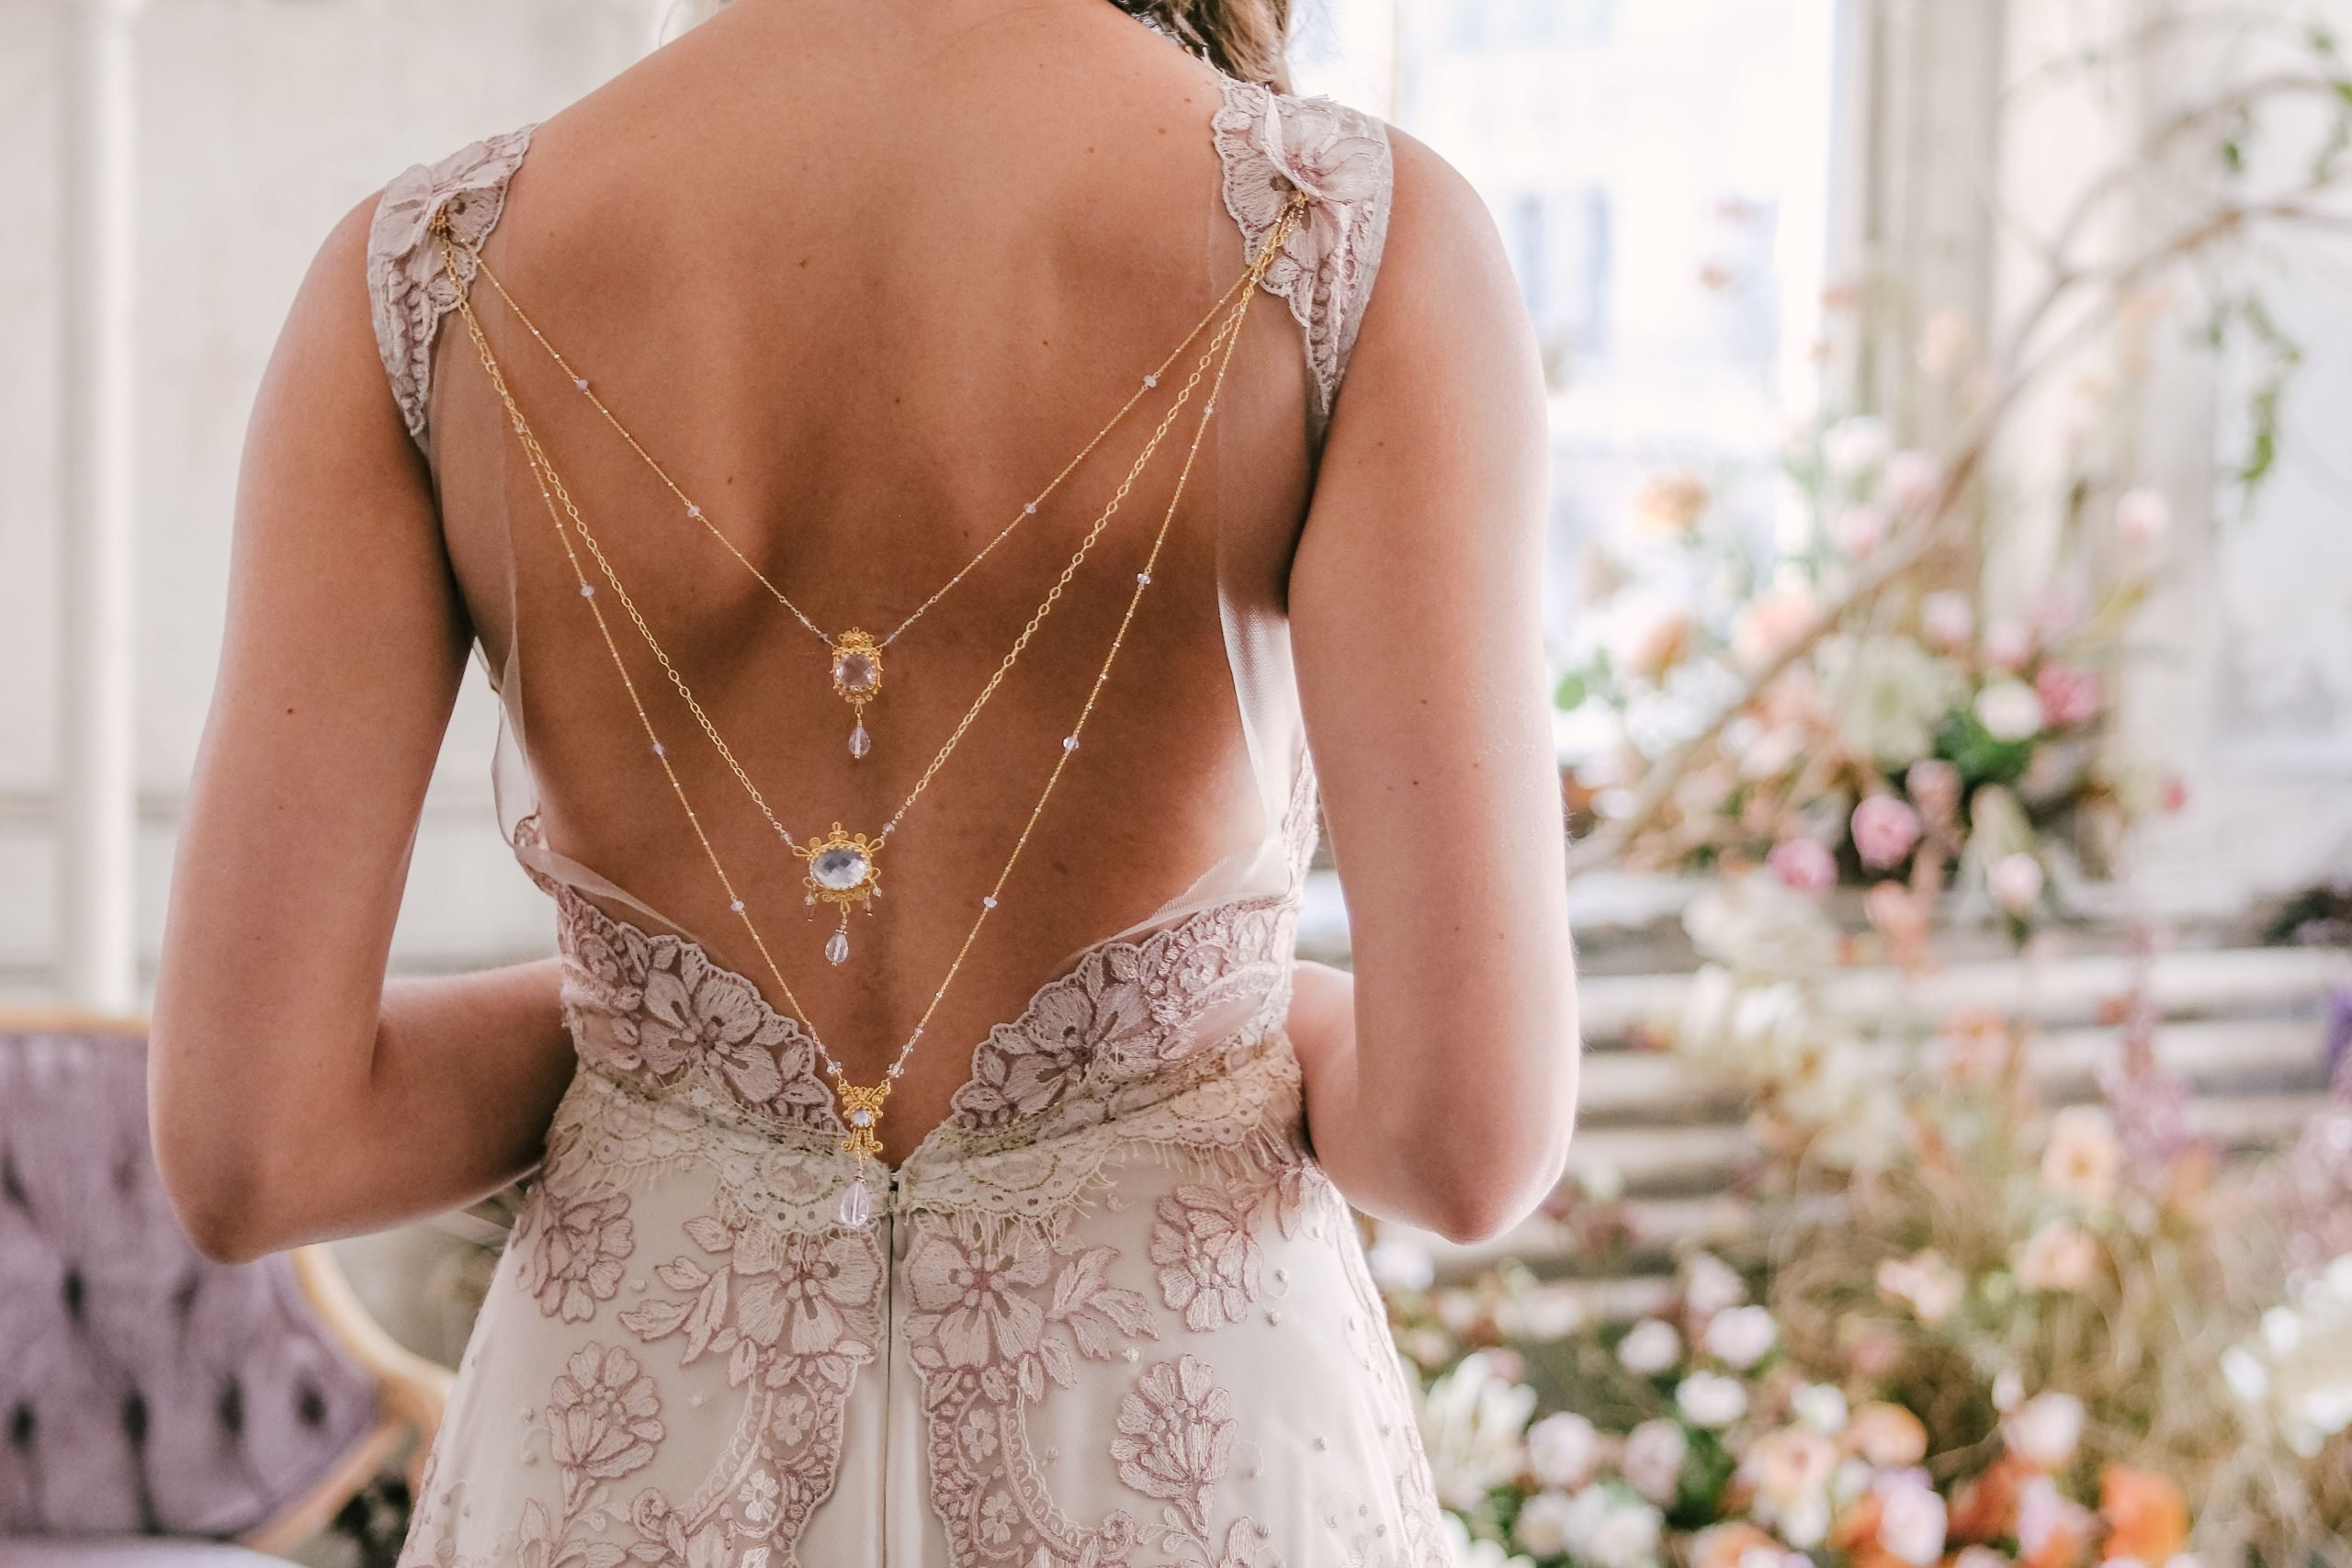 Close up of a statement open back dress with necklacke-style chains draping down the back from the shoulder straps